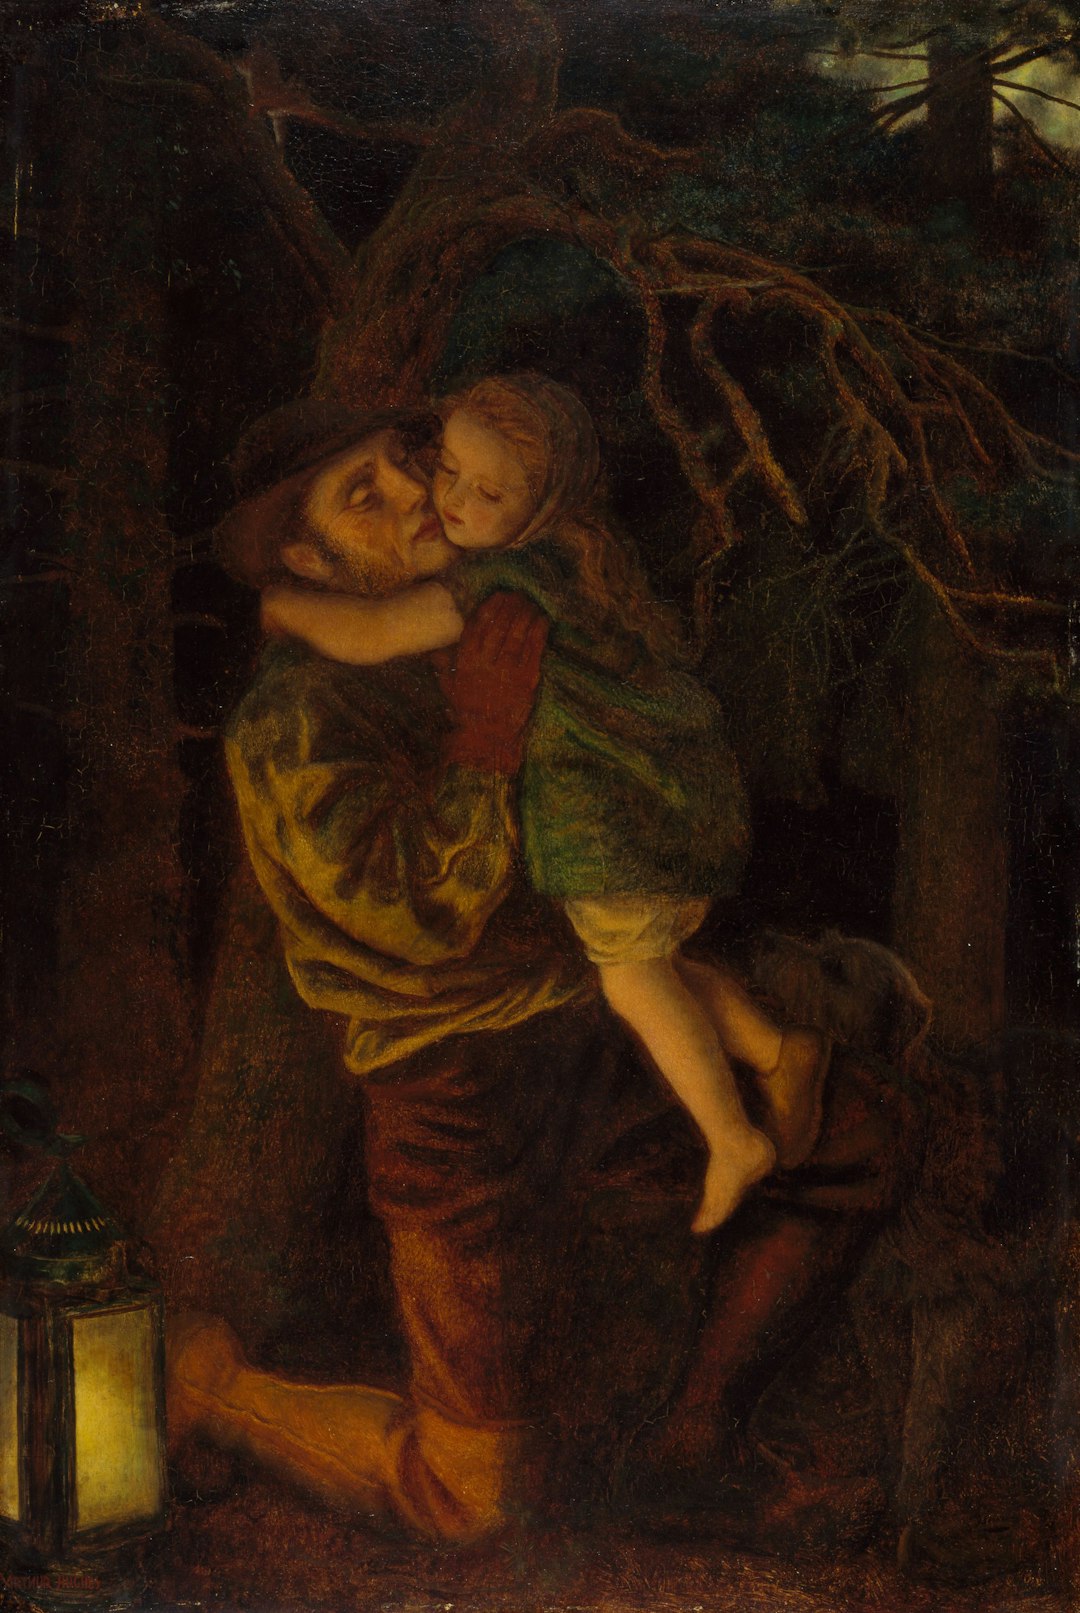 The Lost Child, 1866. By Arthur Hughes